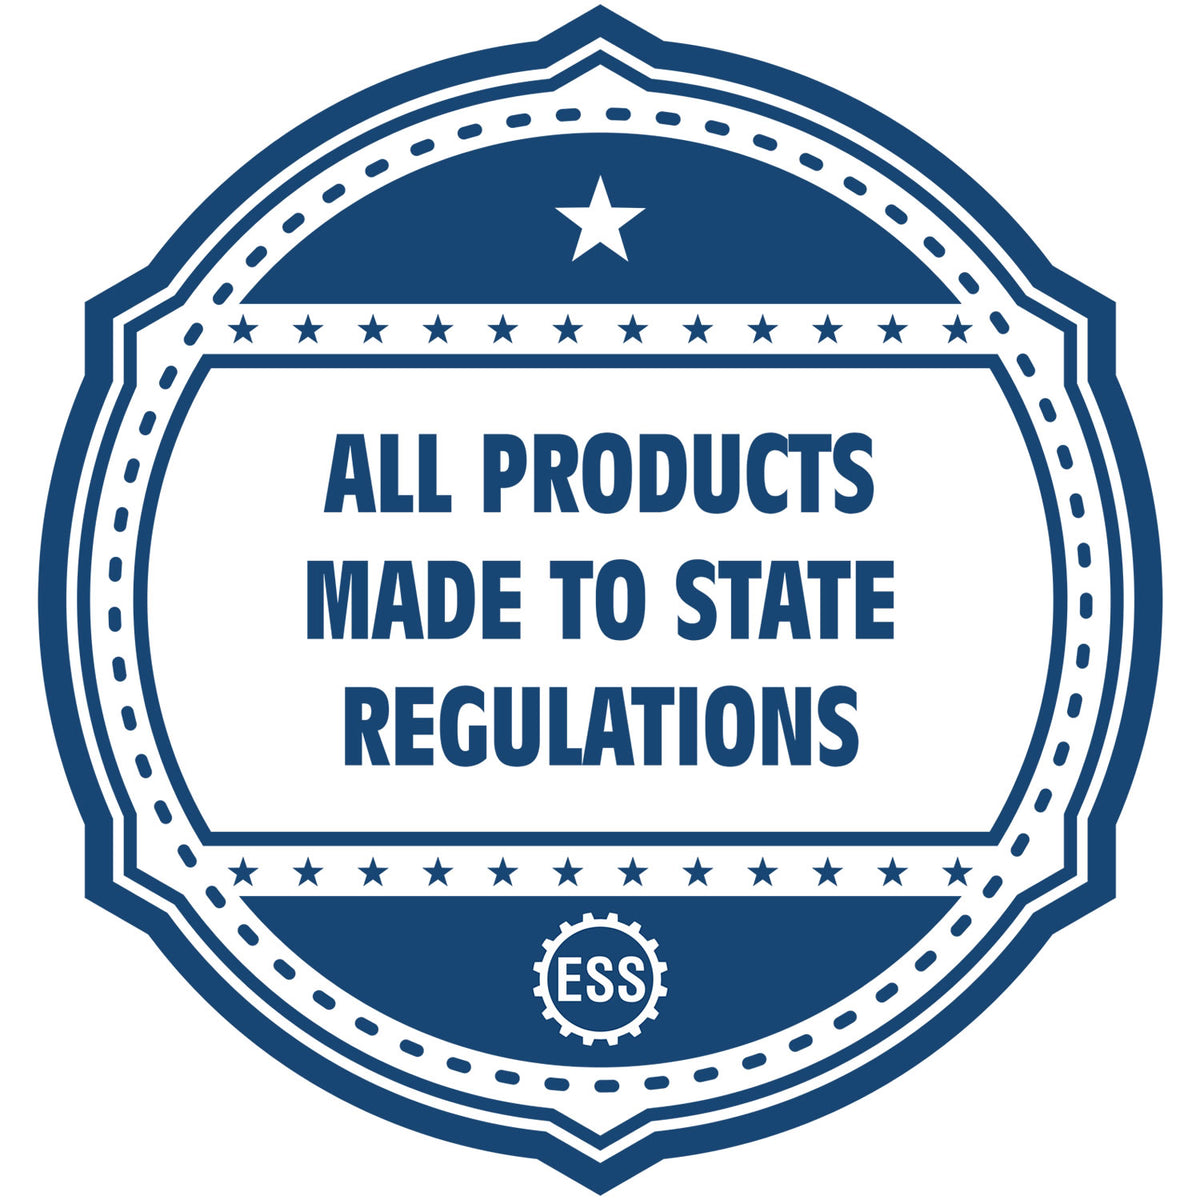 A blue icon or badge for the Hybrid West Virginia Landscape Architect Seal showing that this product is made in compliance with state regulations.